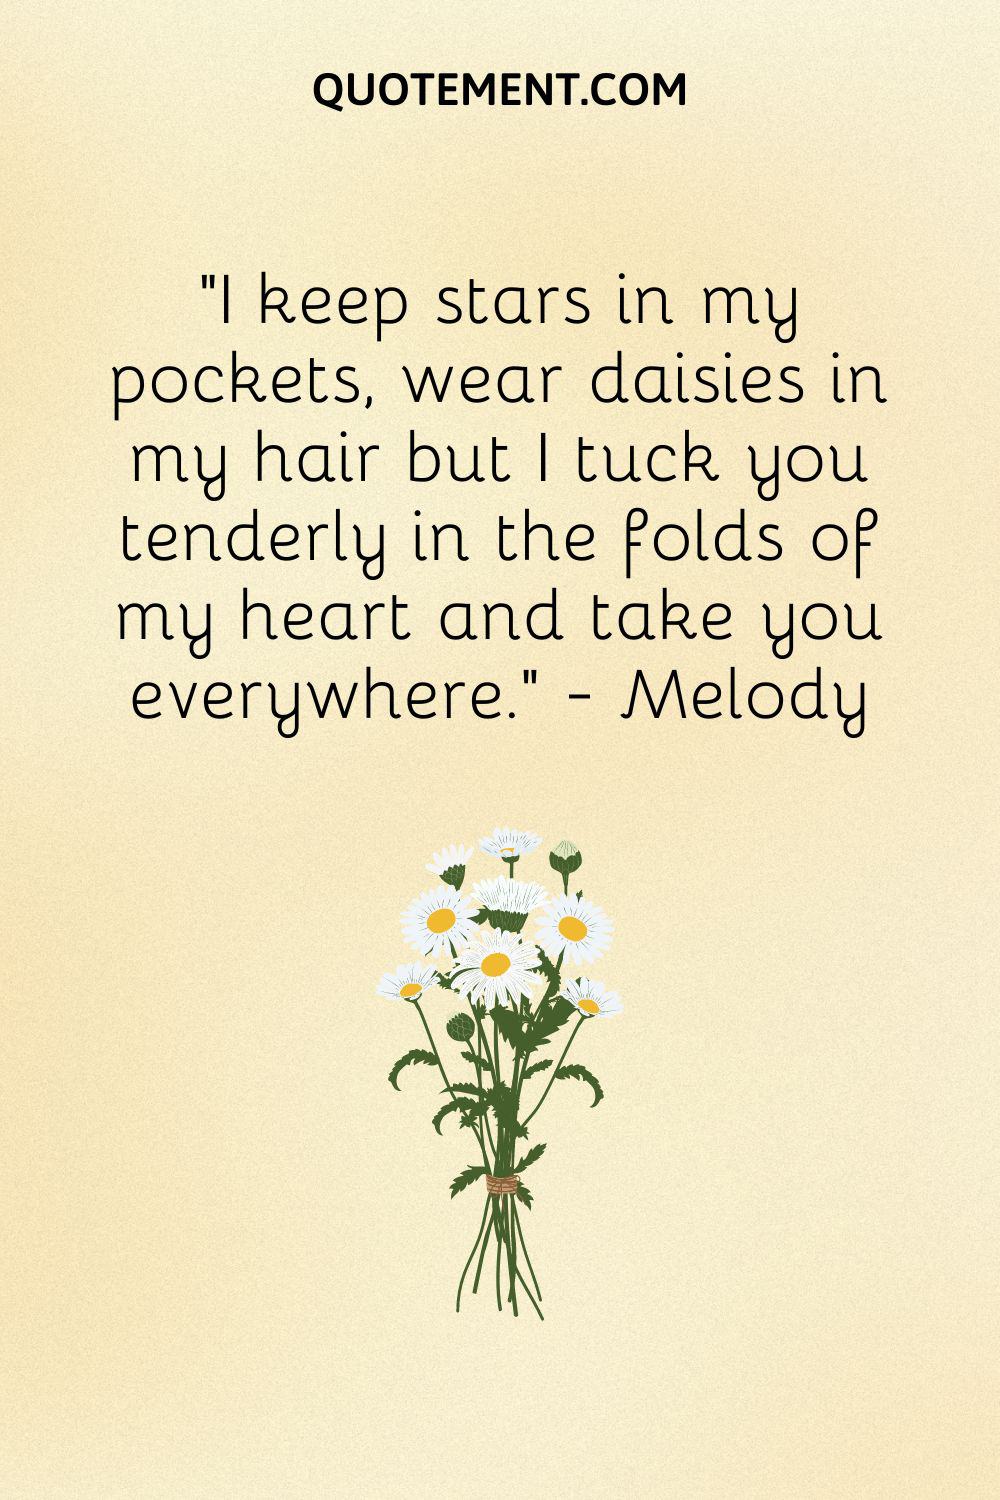 I keep stars in my pockets, wear daisies in my hair but I tuck you tenderly in the folds of my heart and take you everywhere